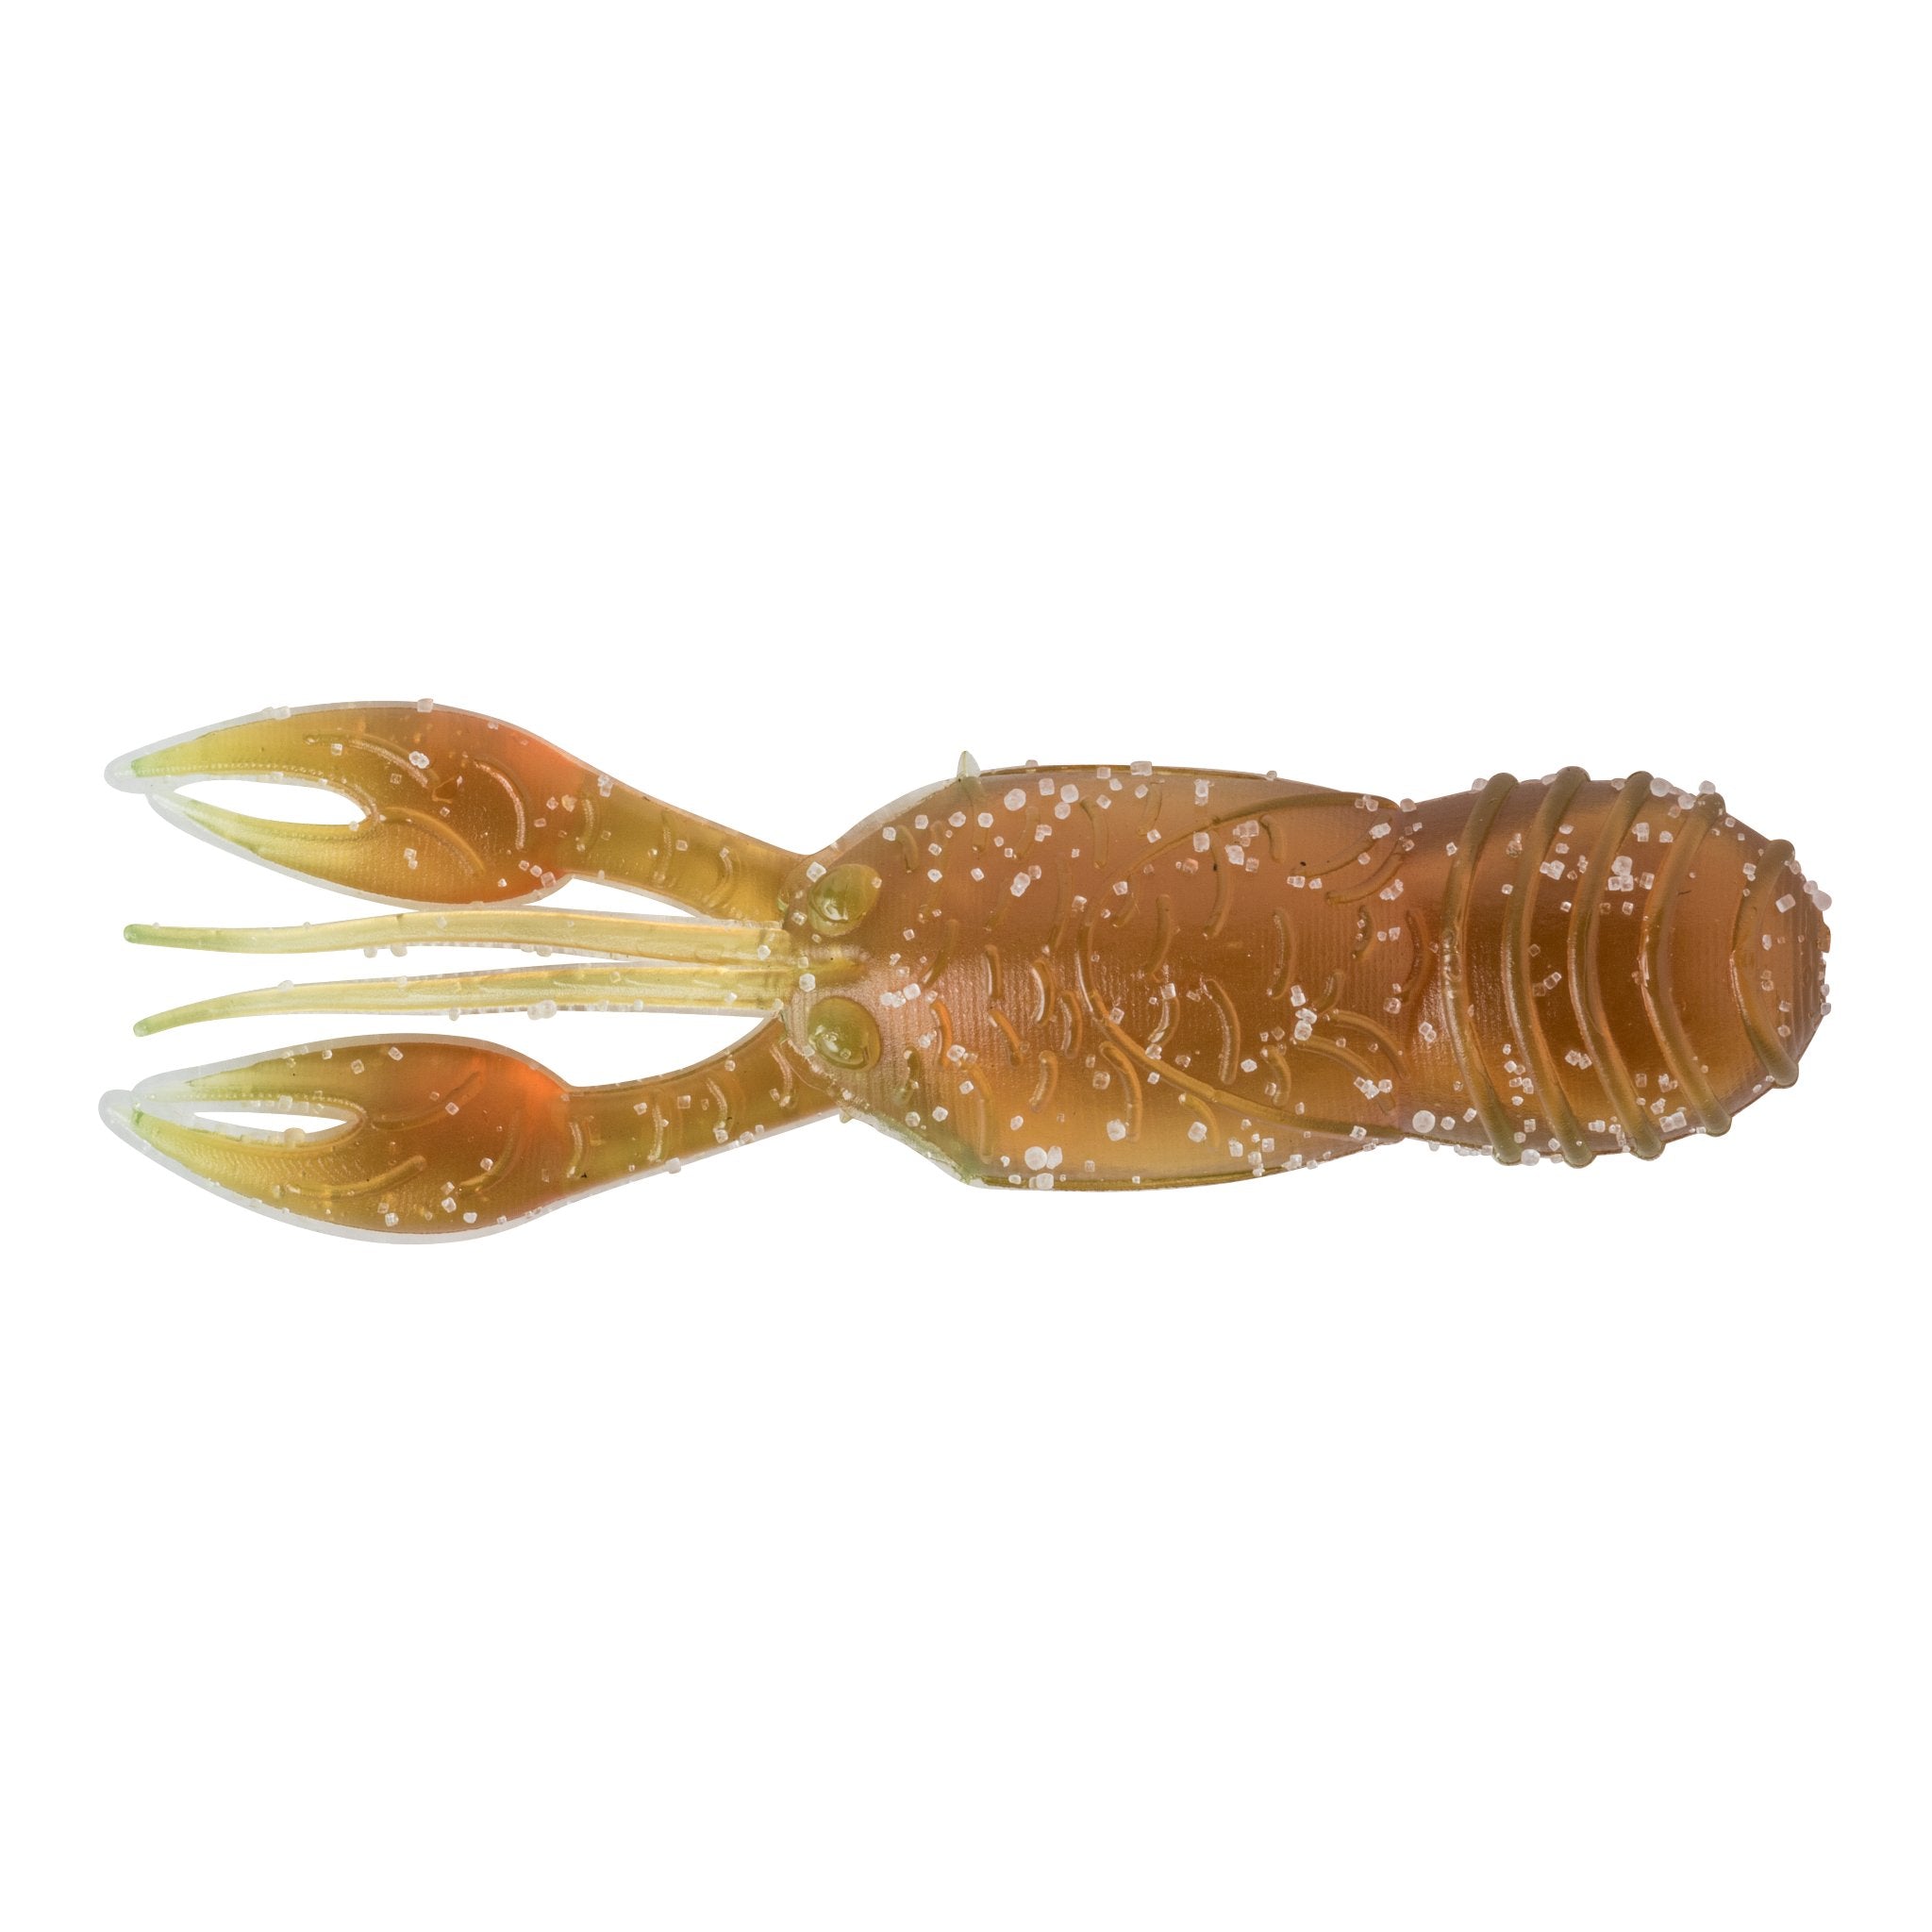 Great Lakes Finesse 2.5" Juvy Craw - Hamilton Bait and Tackle